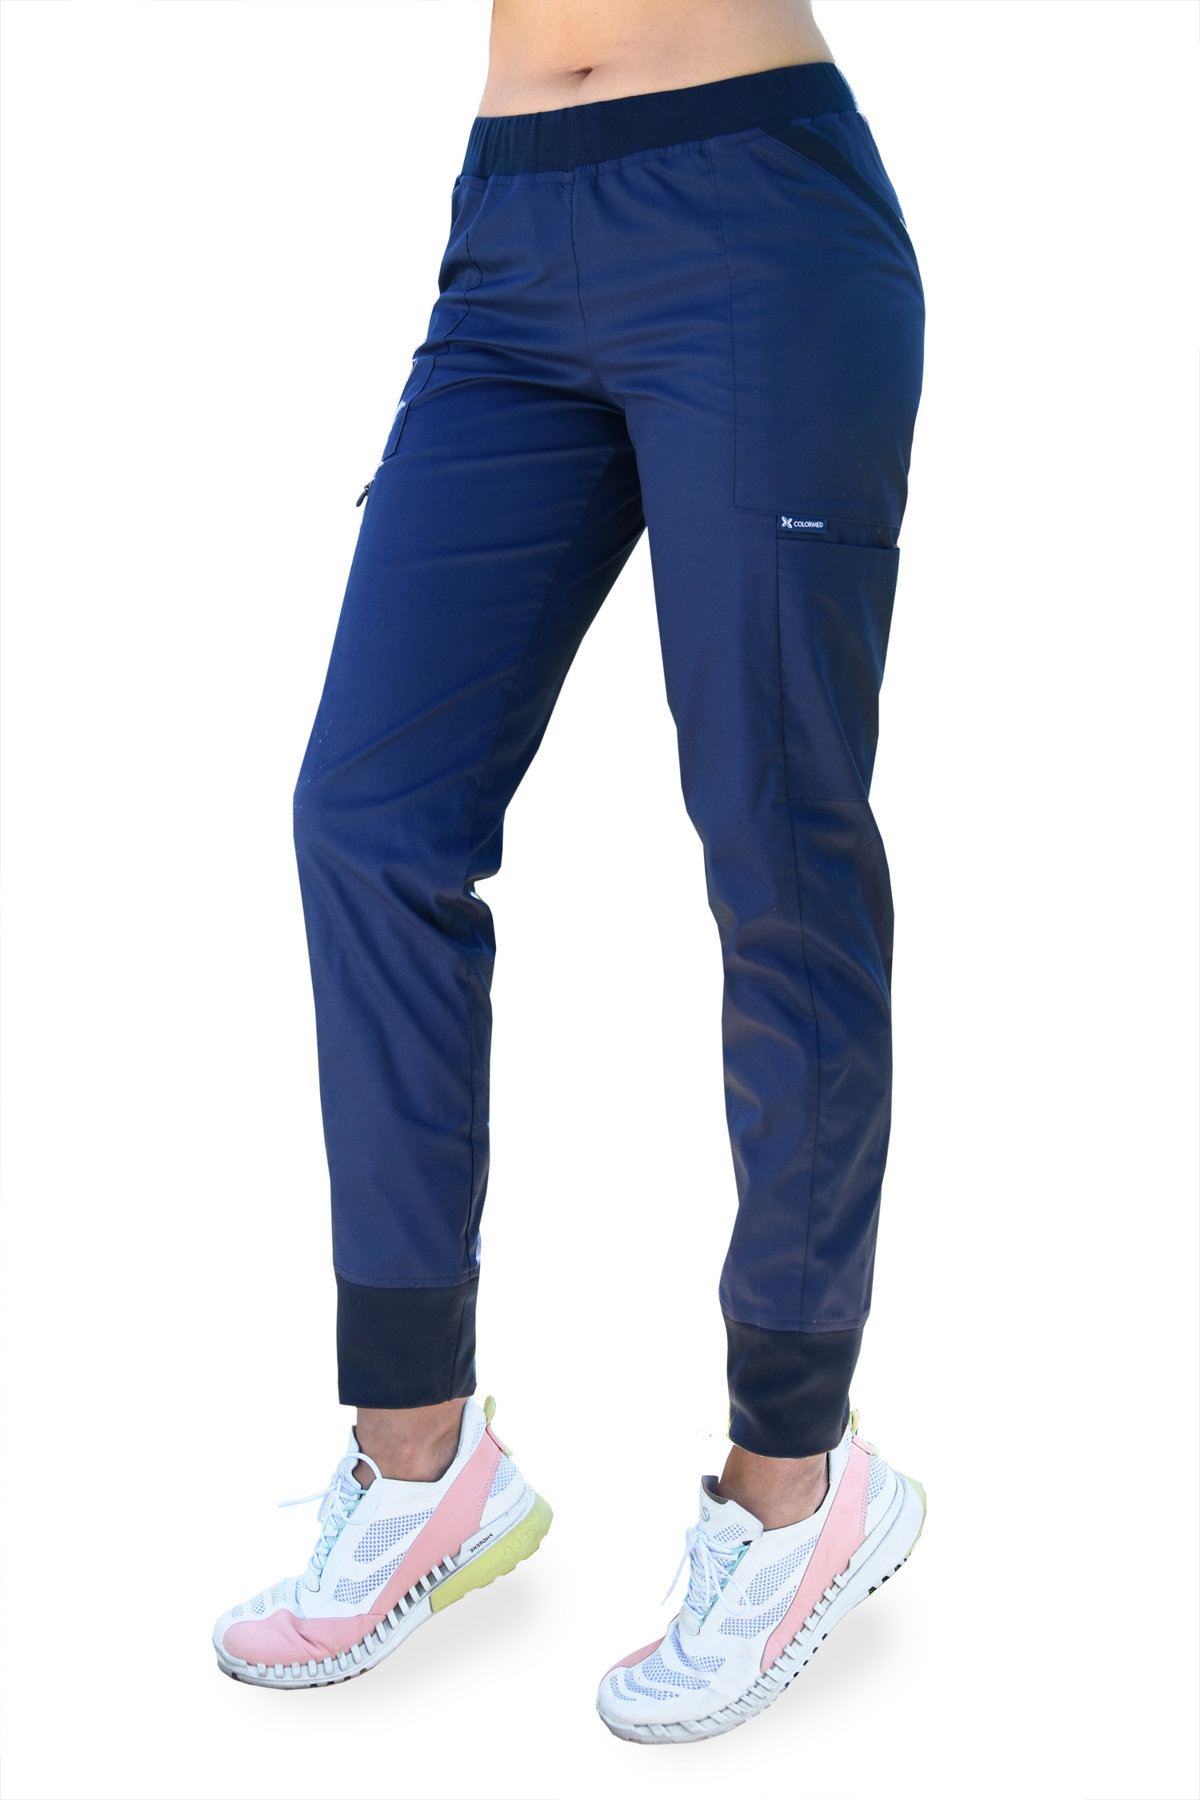 Scrubs pants a + navy blue Medical stripe, clothes lime, SE4-G2 SOFT COLORMED with STRETCH, 